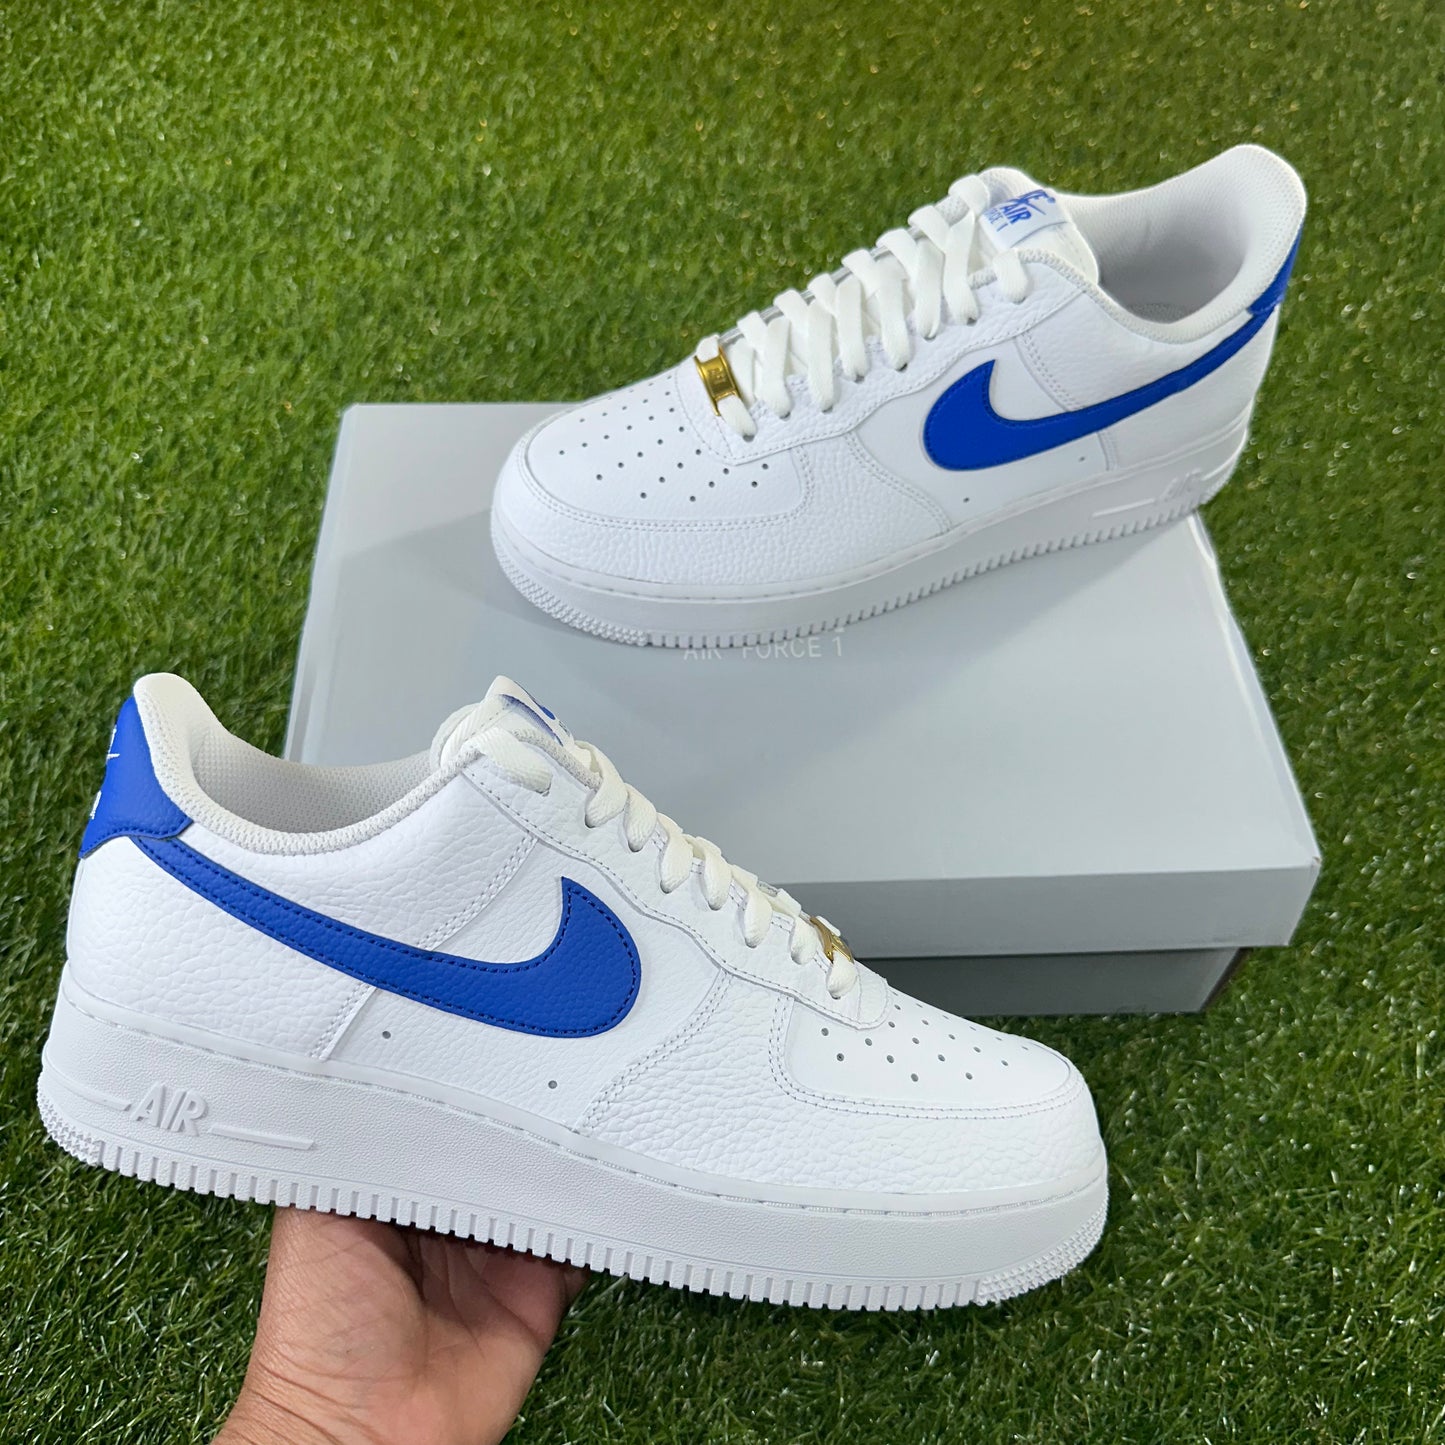 Men, Boys, Teens, Gifts, Wmns, Girls, Urban, Style, Fashion, Men's Shoes, Sneakers, Running Shoes, Nike, Air Force 1, White Shoes,  Women's Shoes, Shoes For Teens, Low Top Sneakers, Blue Check, Royal Blue,